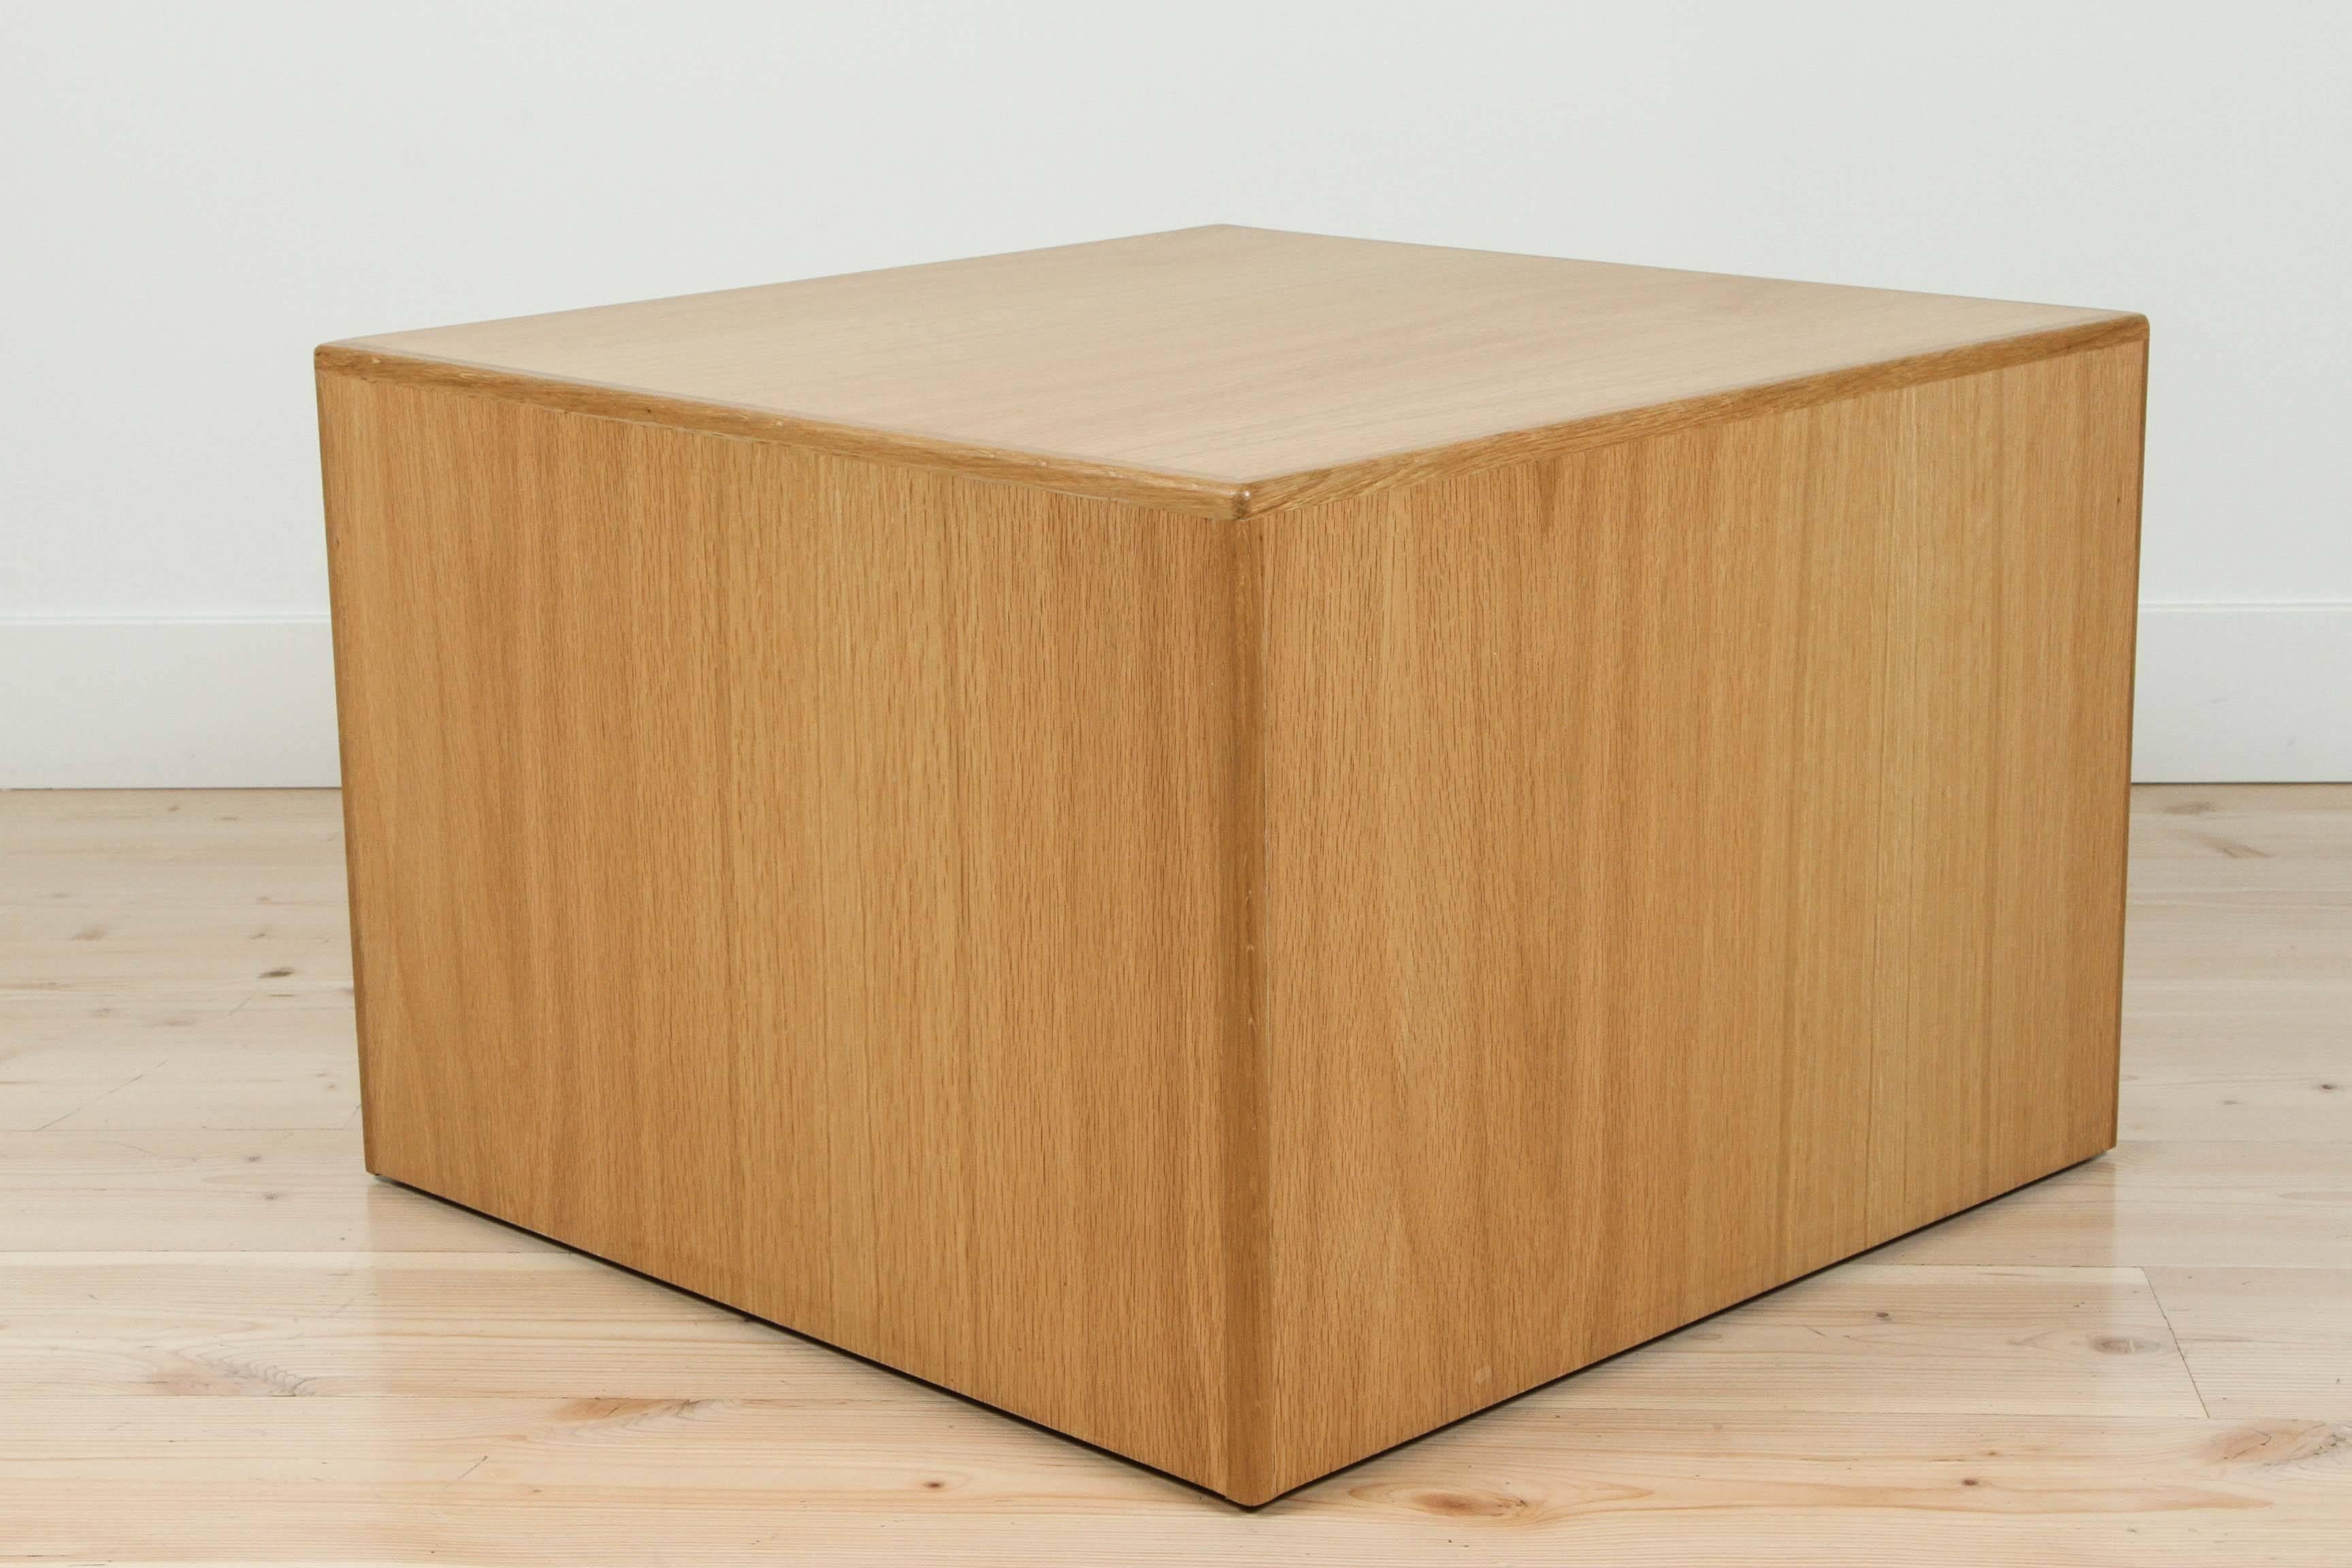 The Wood Cube Table is a cube-shaped side table that is covered on five sides with American Walnut or White Oak with solid wood edge banding and a 3/4″ floating inset base. This pair pictured in Oiled Oak.

Available to order in various finishes